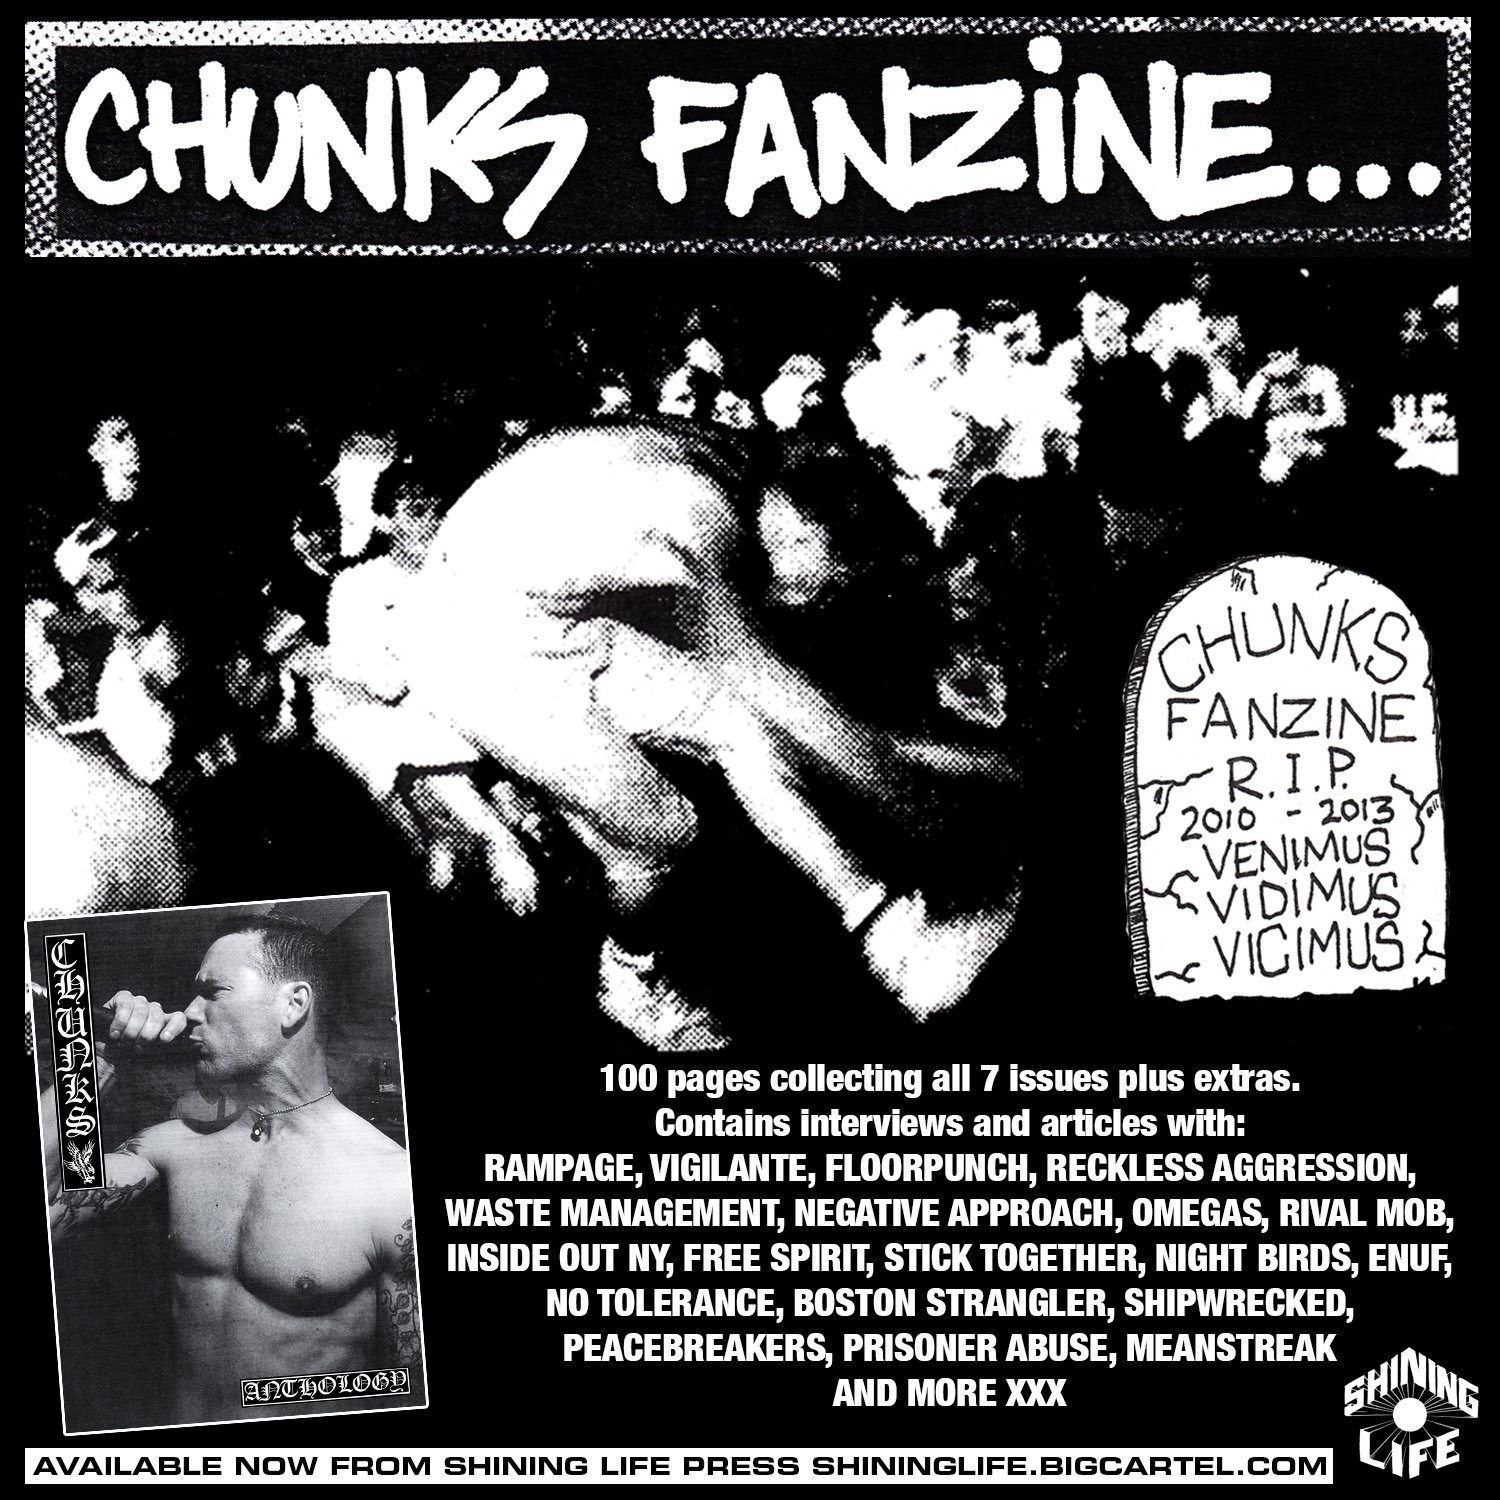 ambrose on X: a defining zine of my generation: shouts to the 28-32 yrs  old teenage town of hardcore fetishists and early 20's nu-scene obsessives  t.coTNjFW6aif5 t.co5qjrhi0vWH  X